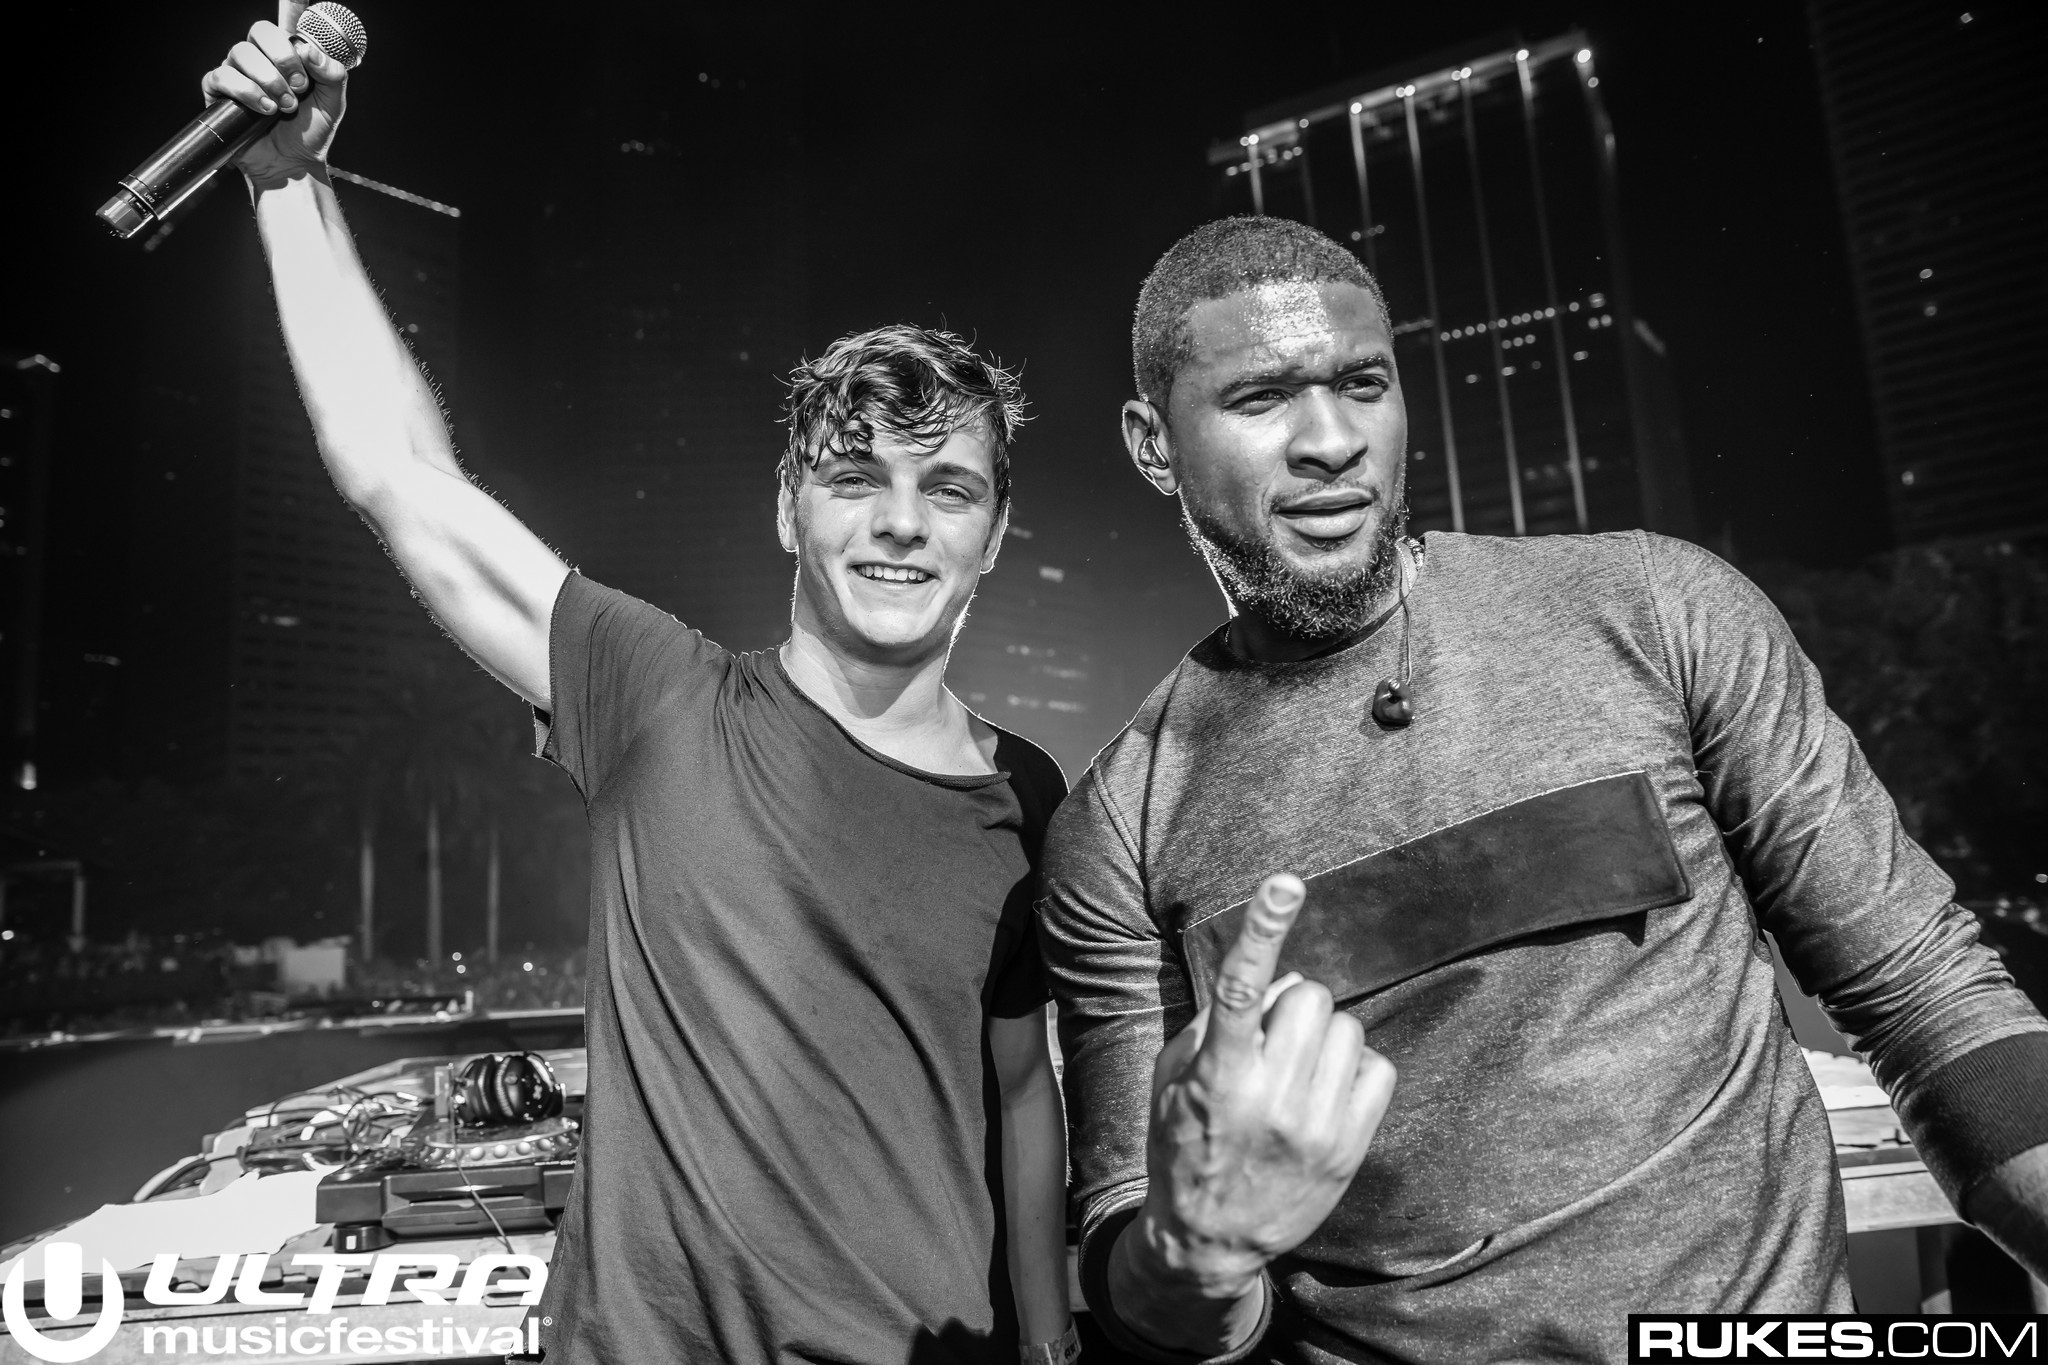 Martin Garrix surprised the Main Stage crowd with a guest appearance from R&B vocalist Usher. 